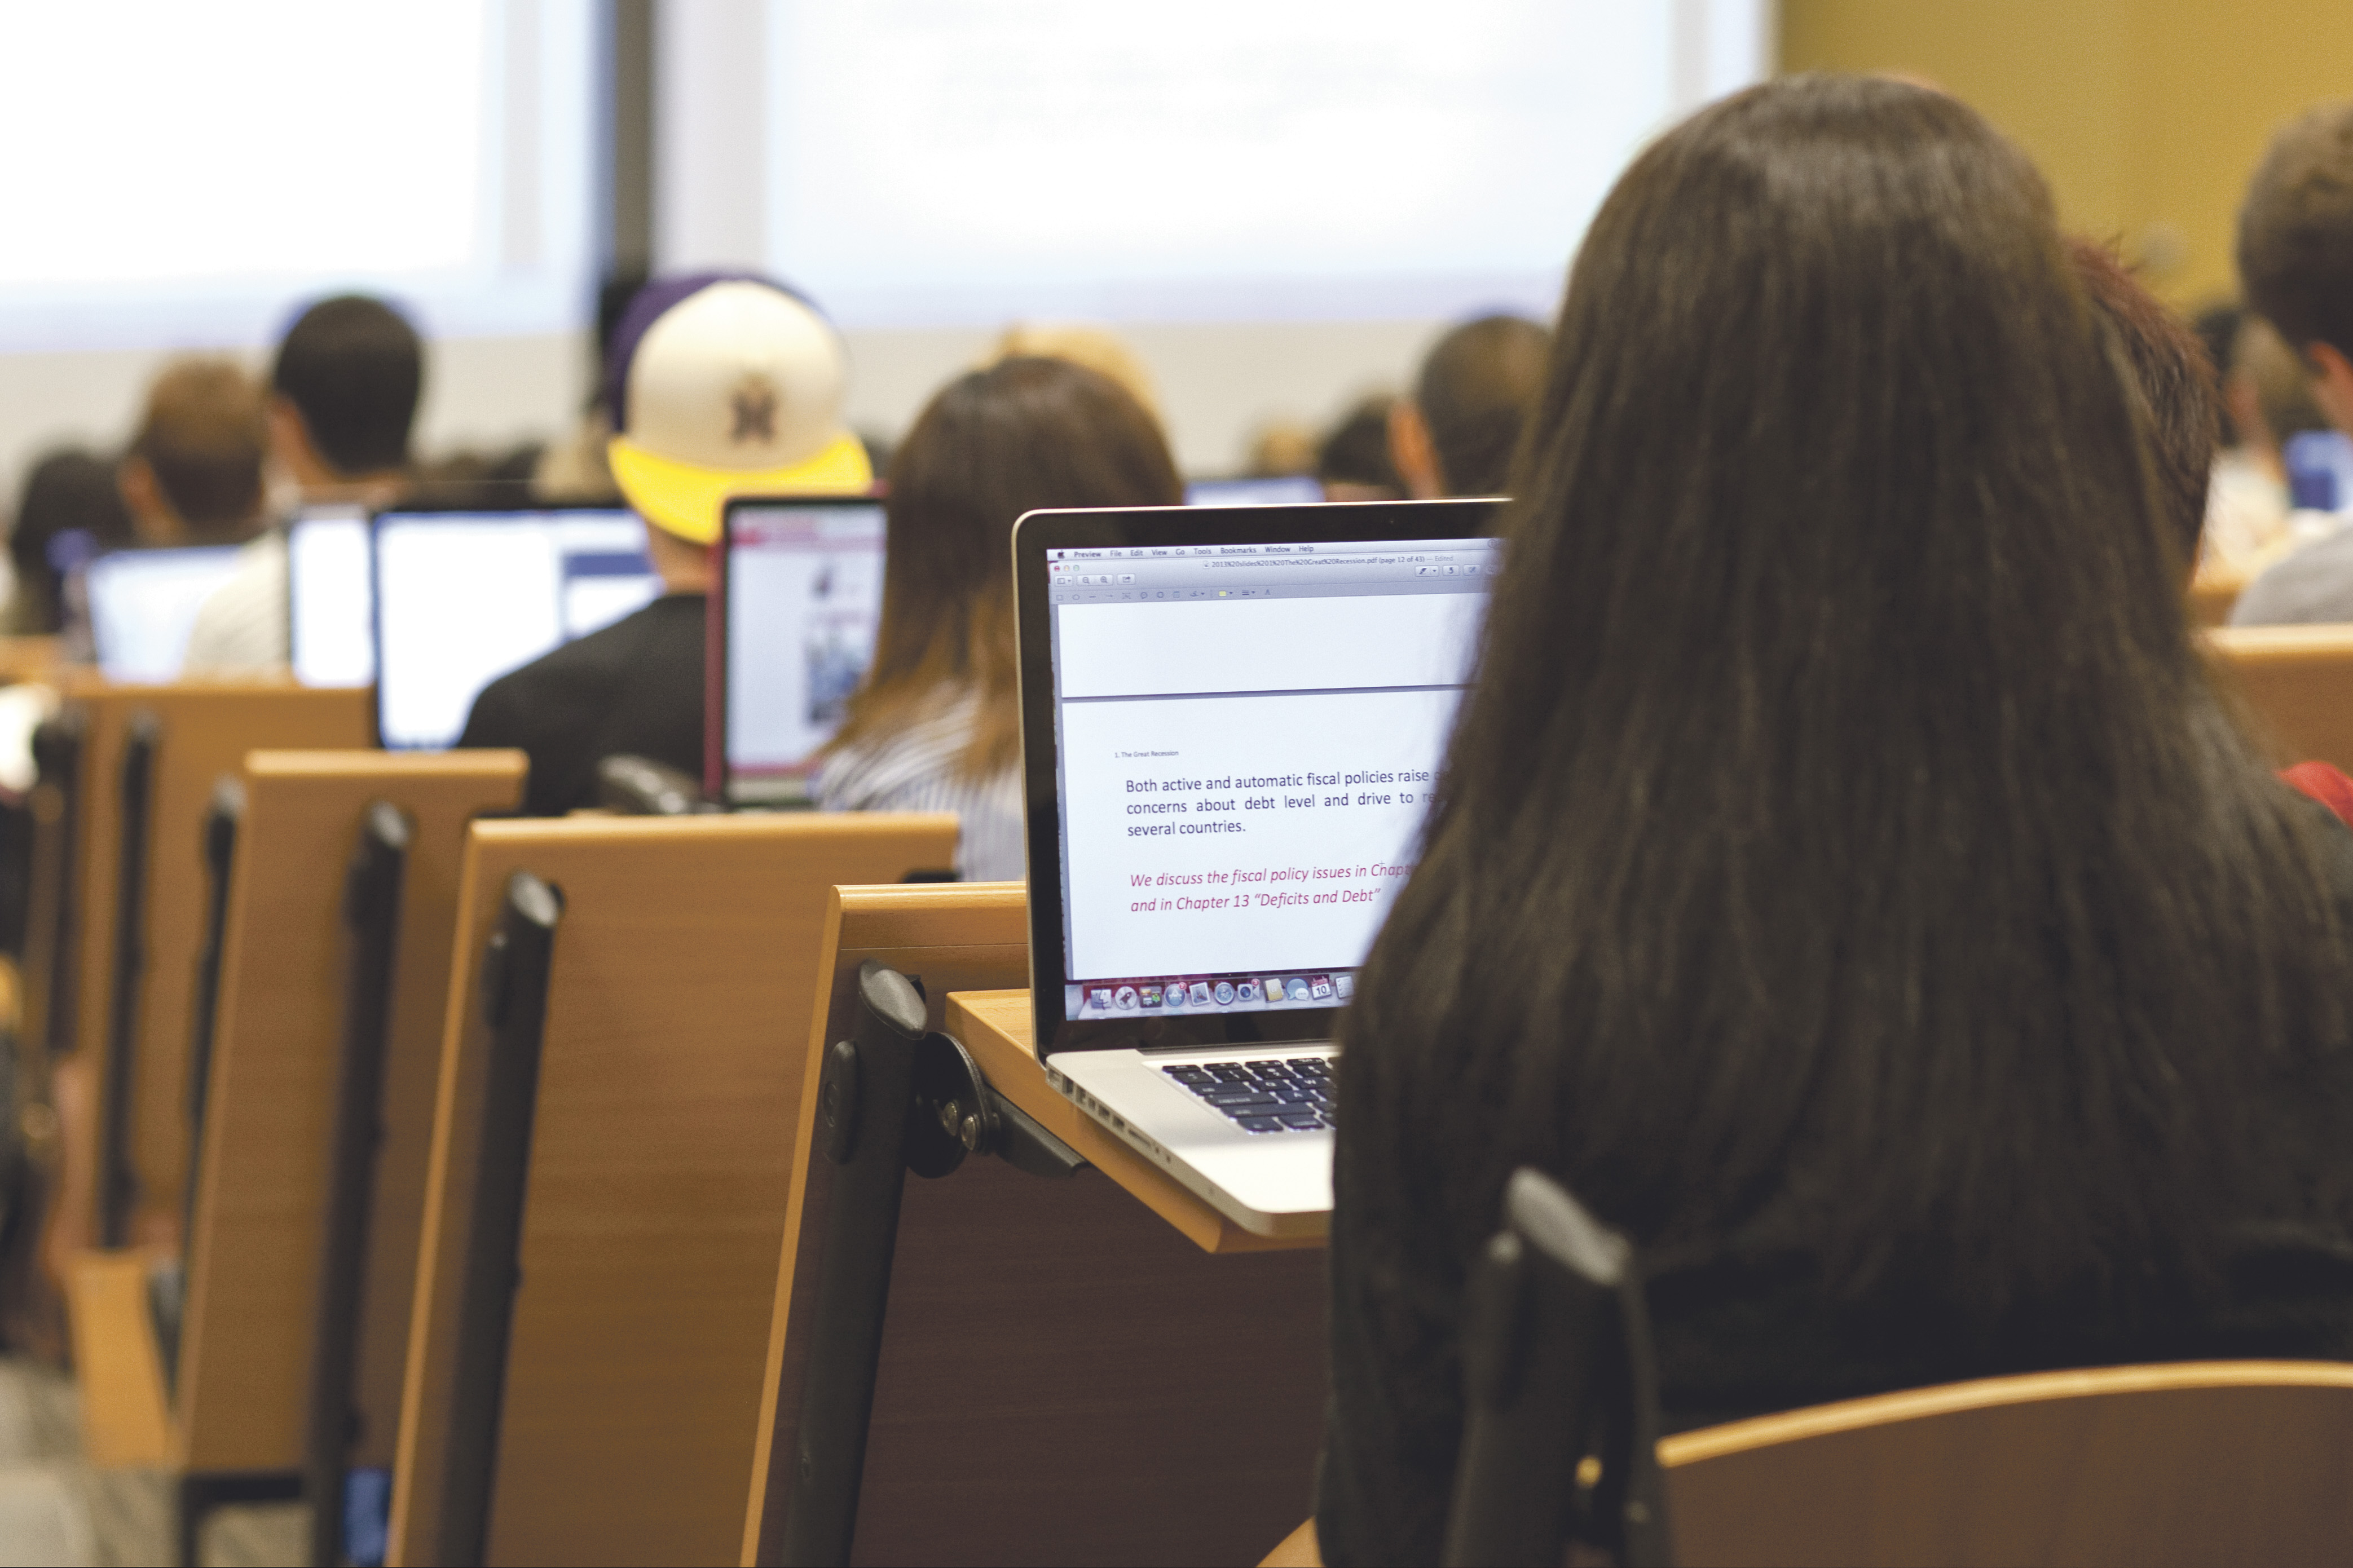 New research shows laptops in class impact grades – The Cord